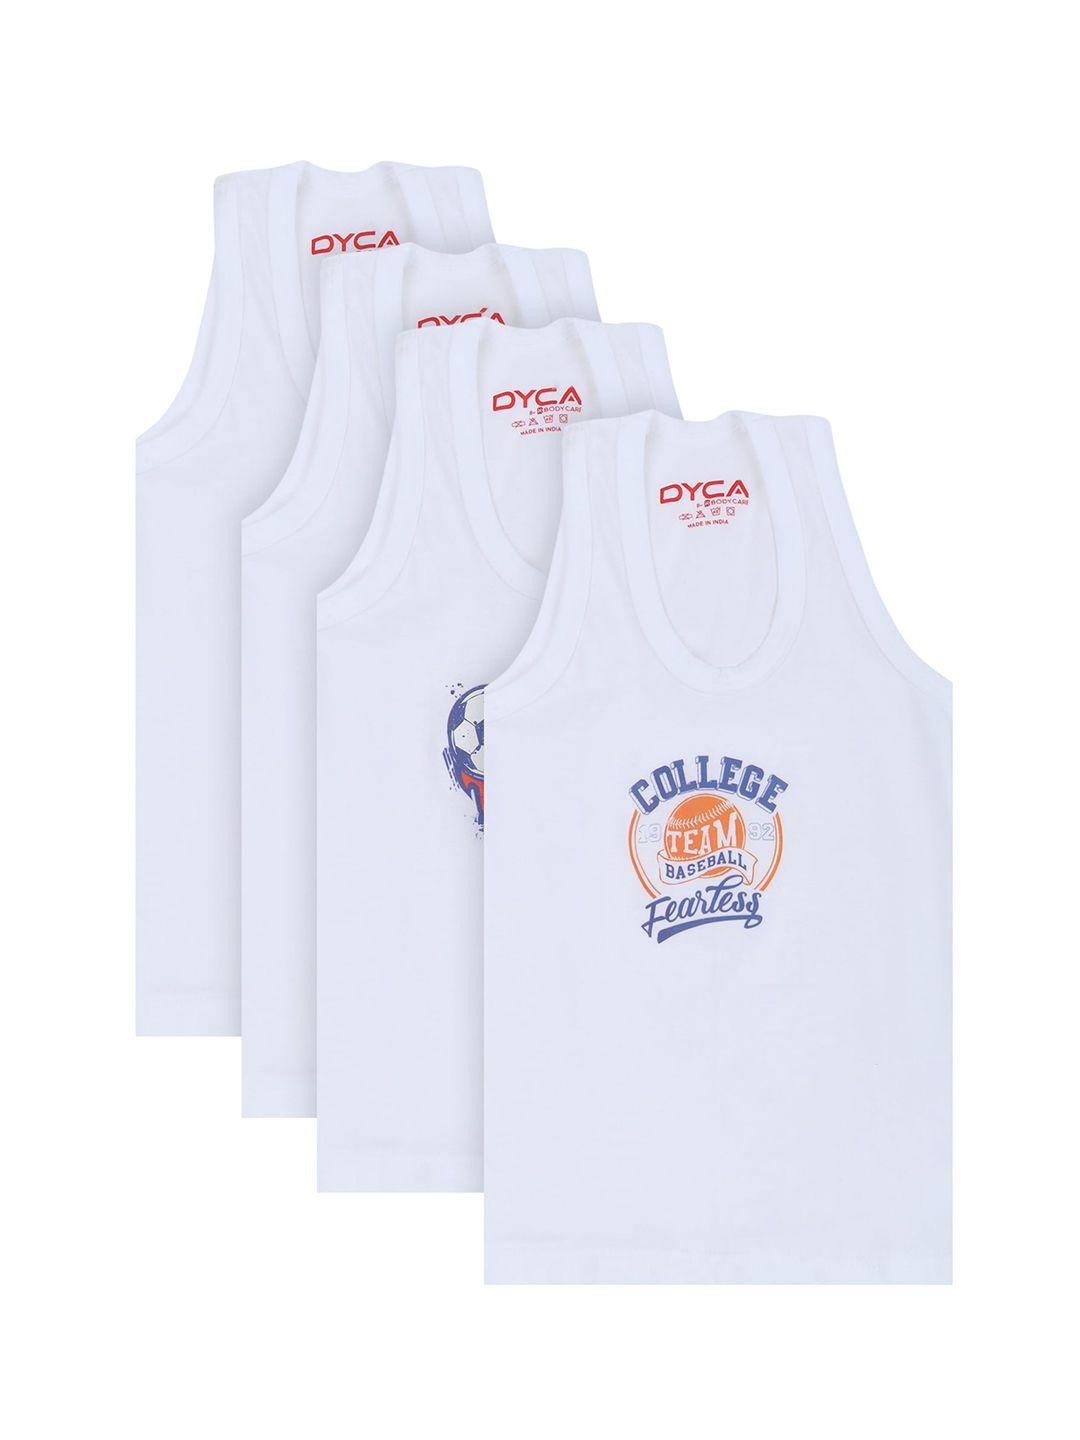 dyca boys pack of 4 assorted white printed vests